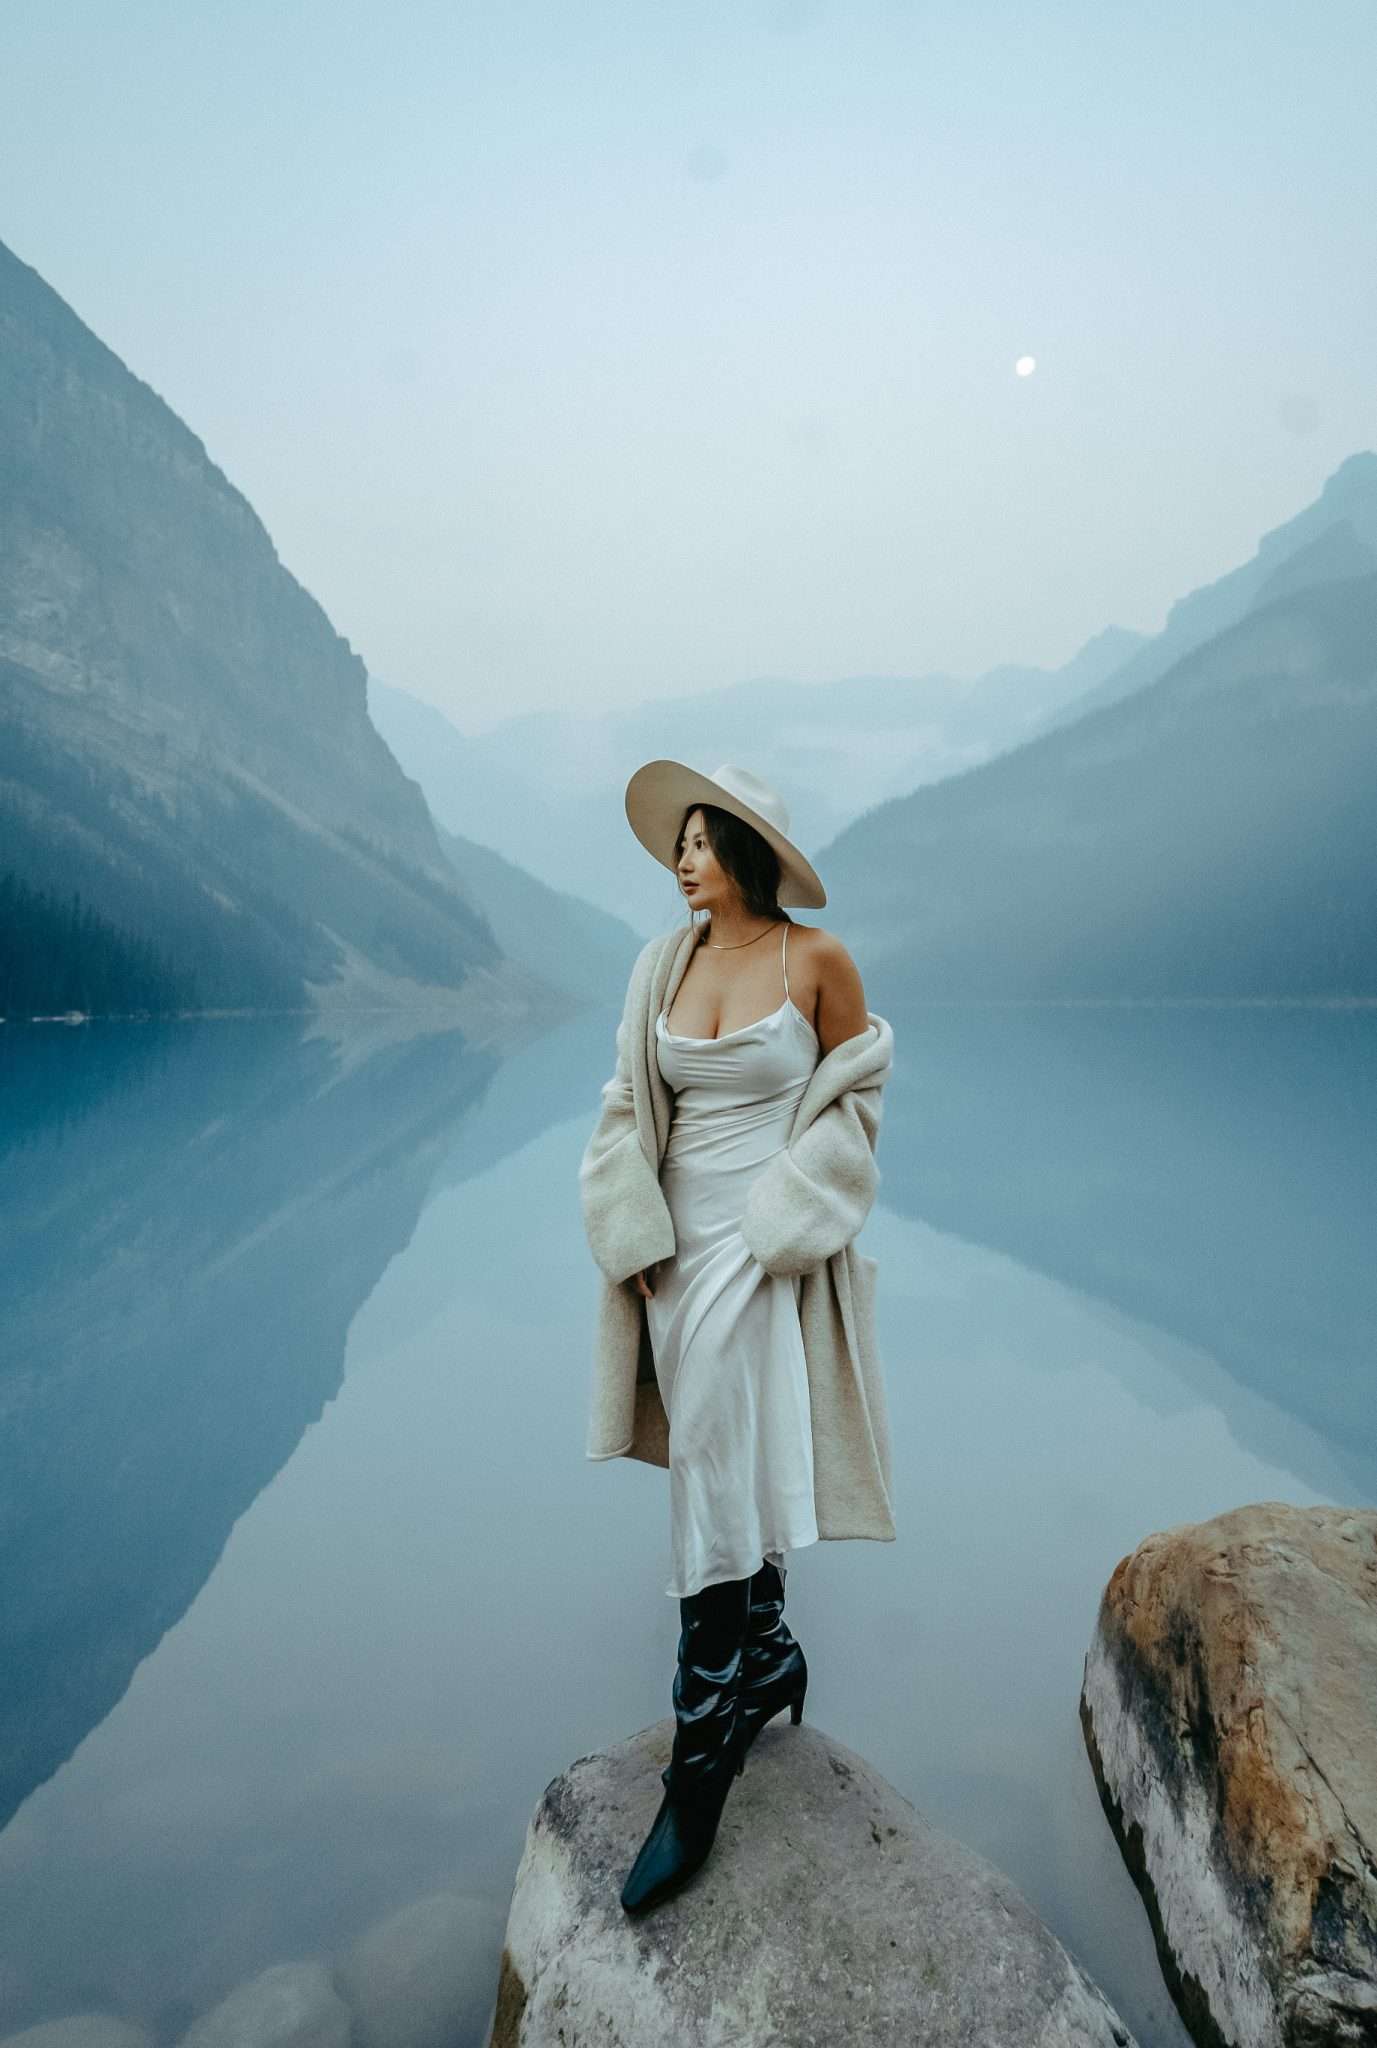 Coco Tran — Aesthetic Travel Blog By Film Photographer Coco Tran https://cocotran.com/what-to-wear-in-banff/